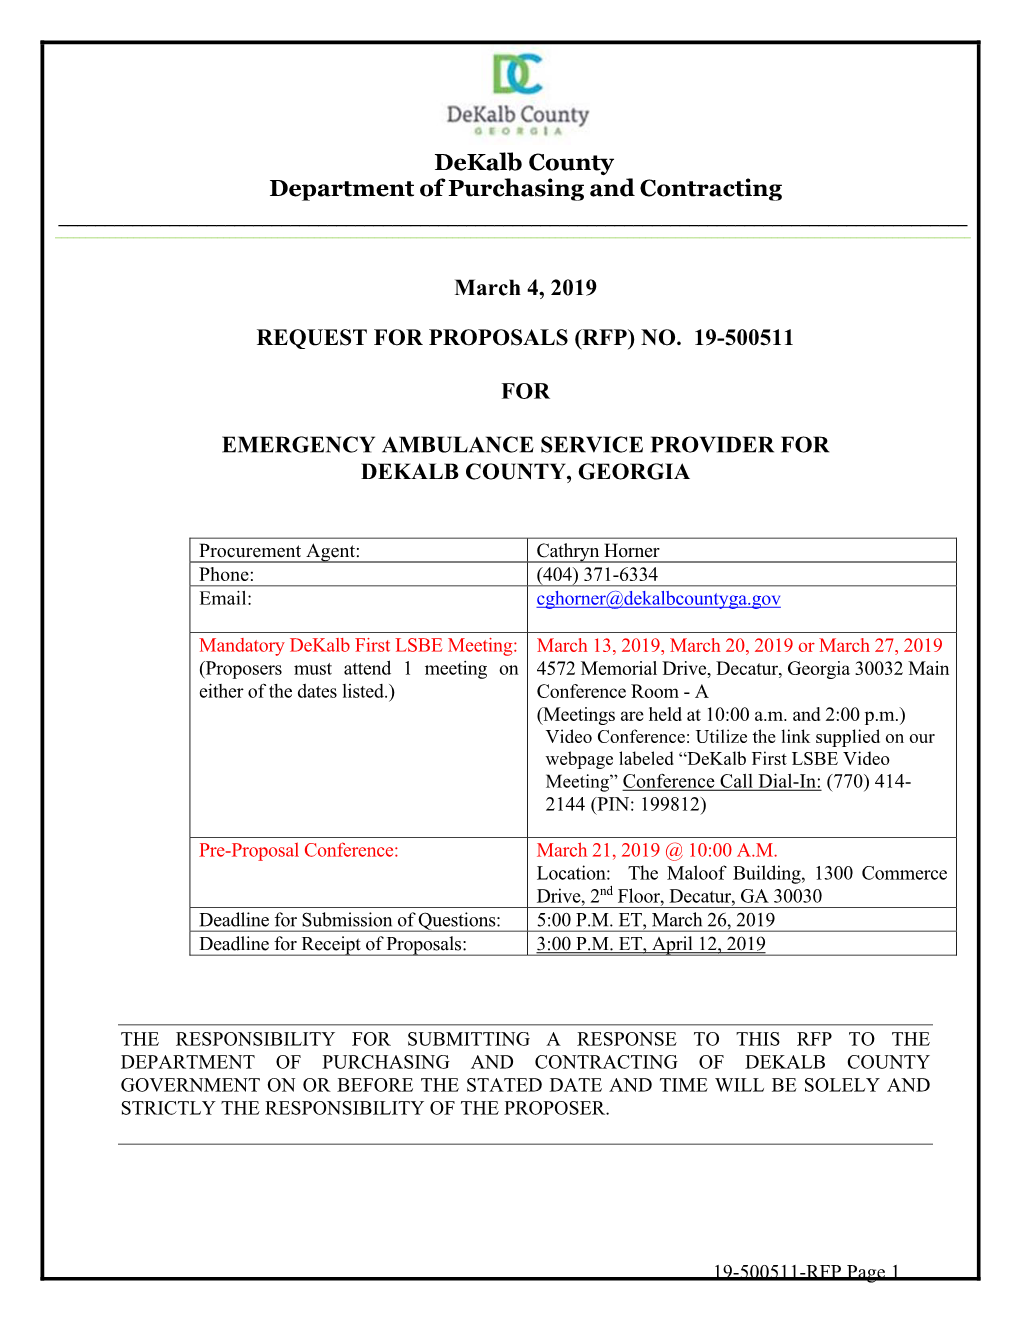 Dekalb County Department of Purchasing and Contracting March 4, 2019 REQUEST for PROPOSALS (RFP) NO. 19-500511 for EMERGENCY AM